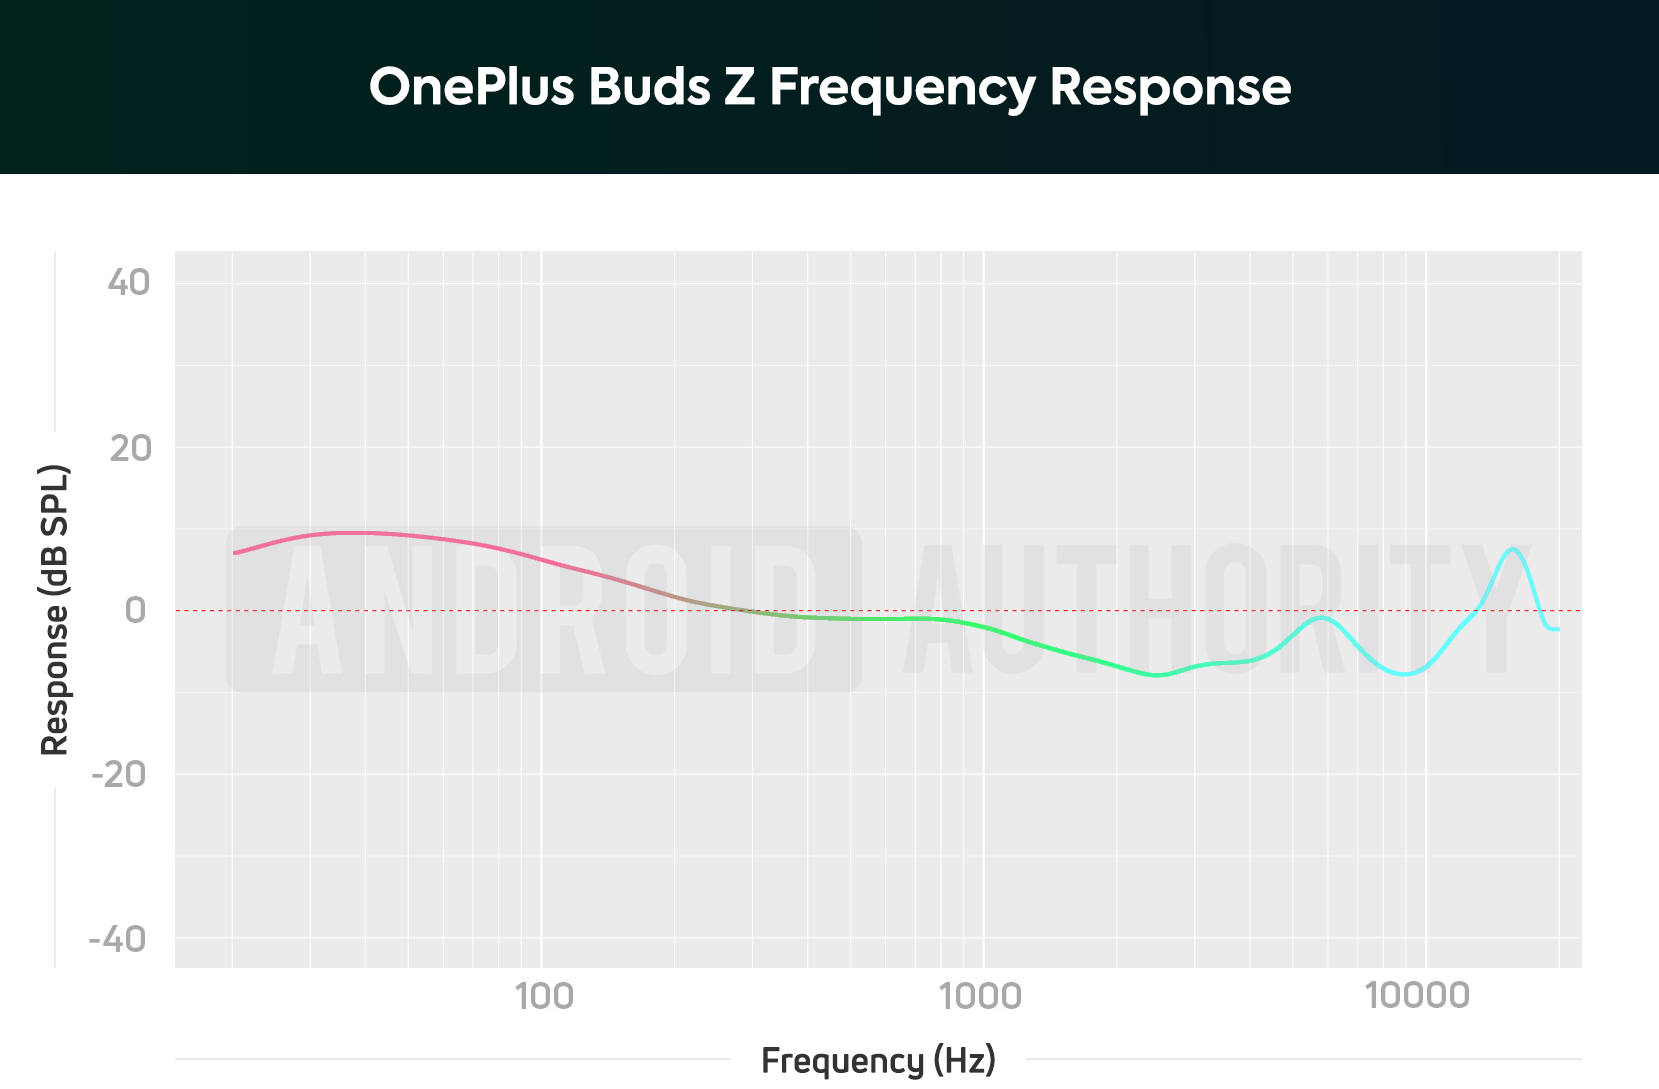 OnePlus Buds Z AA frequency response chart